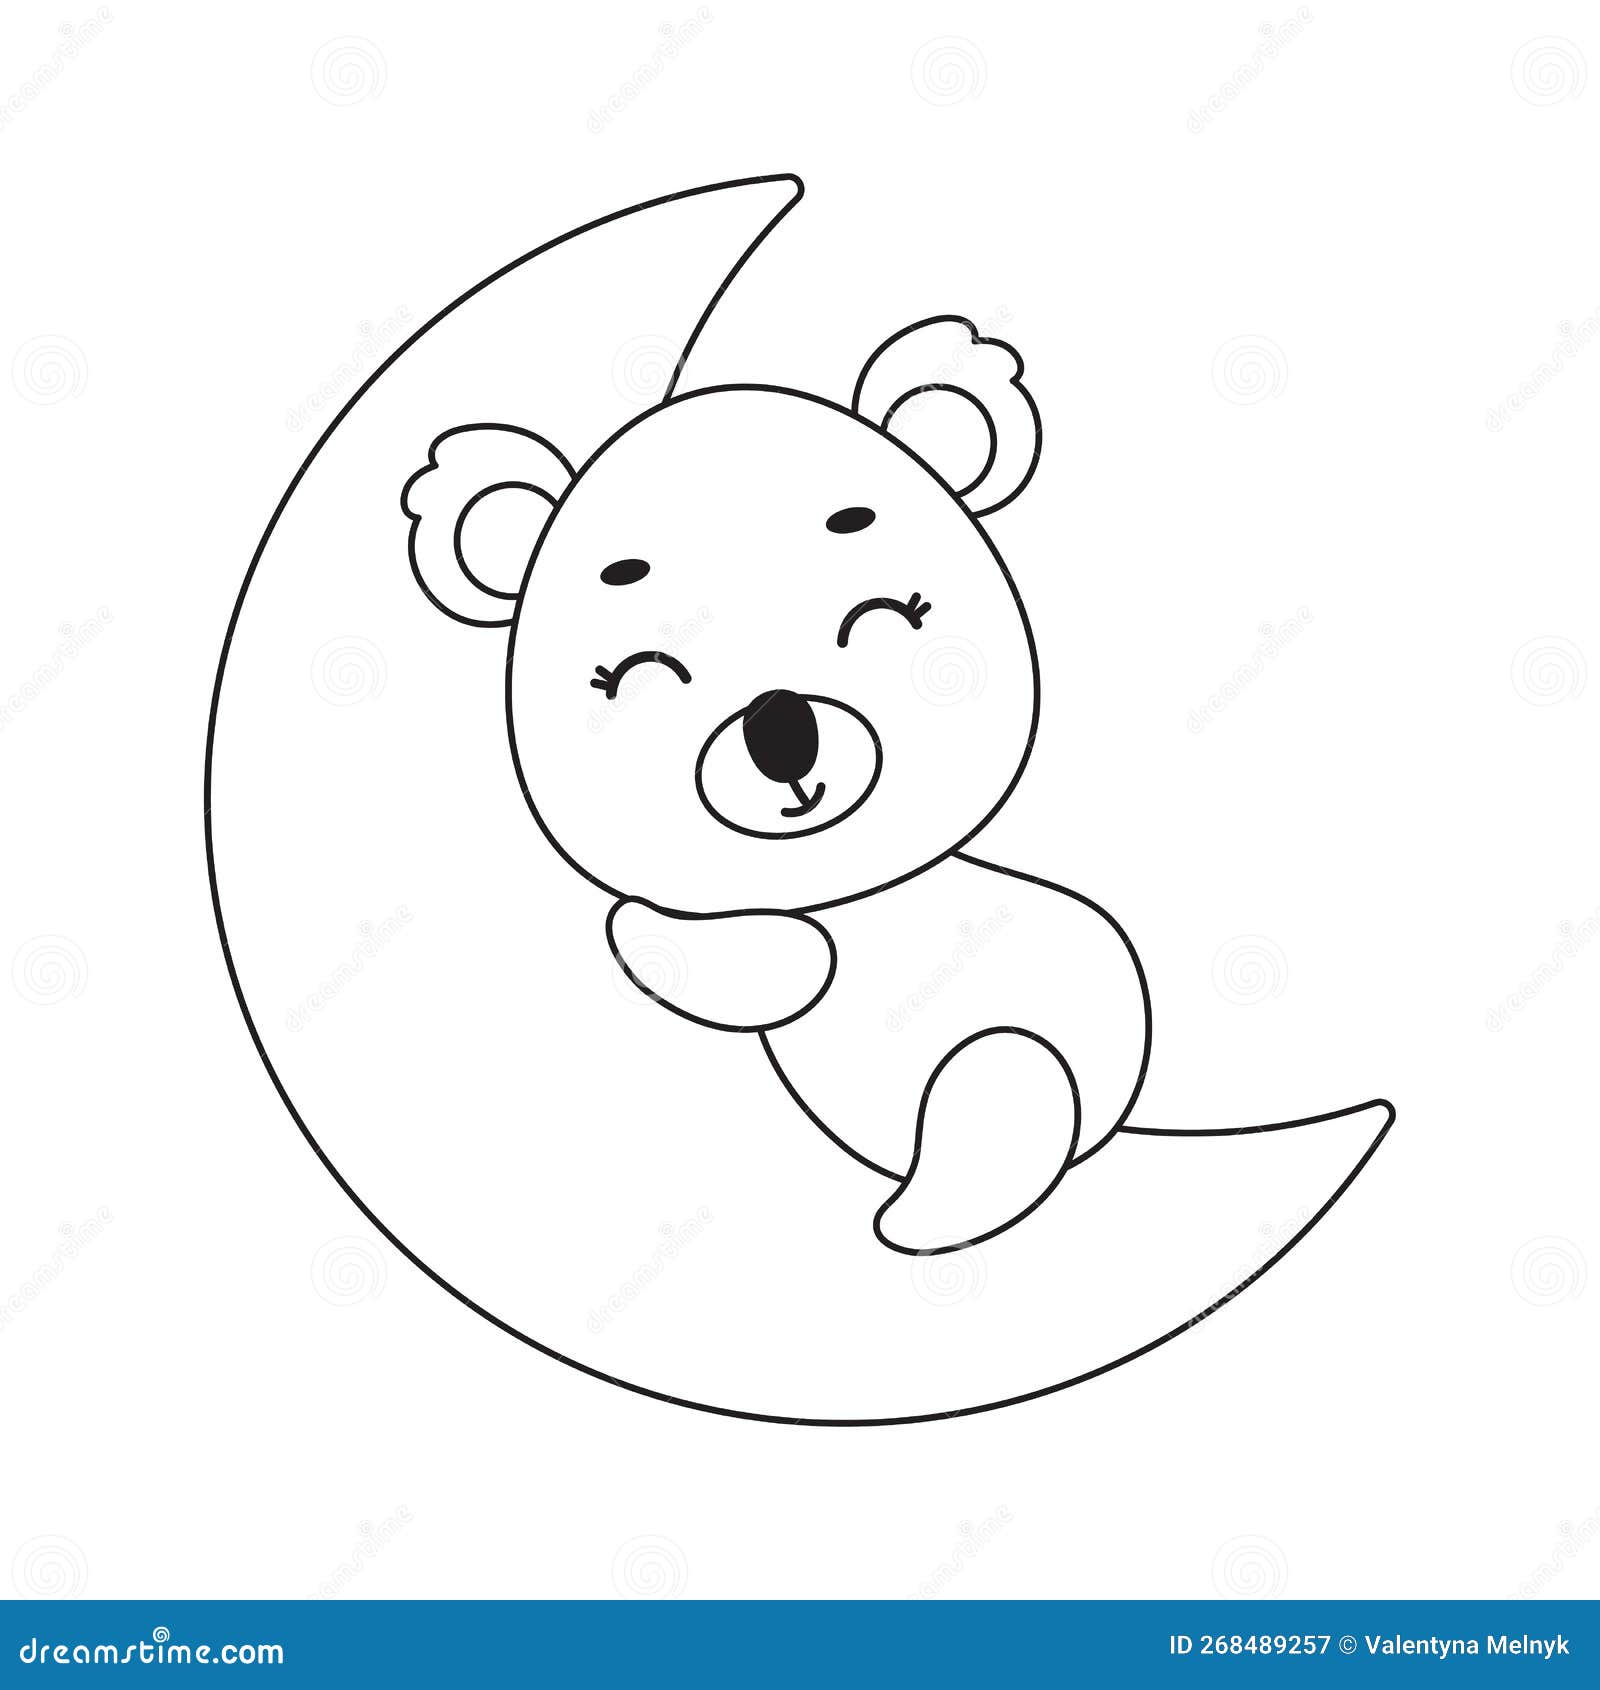 Coloring Page Cute Little Koala Sleeping on Moon. Coloring Book for ...